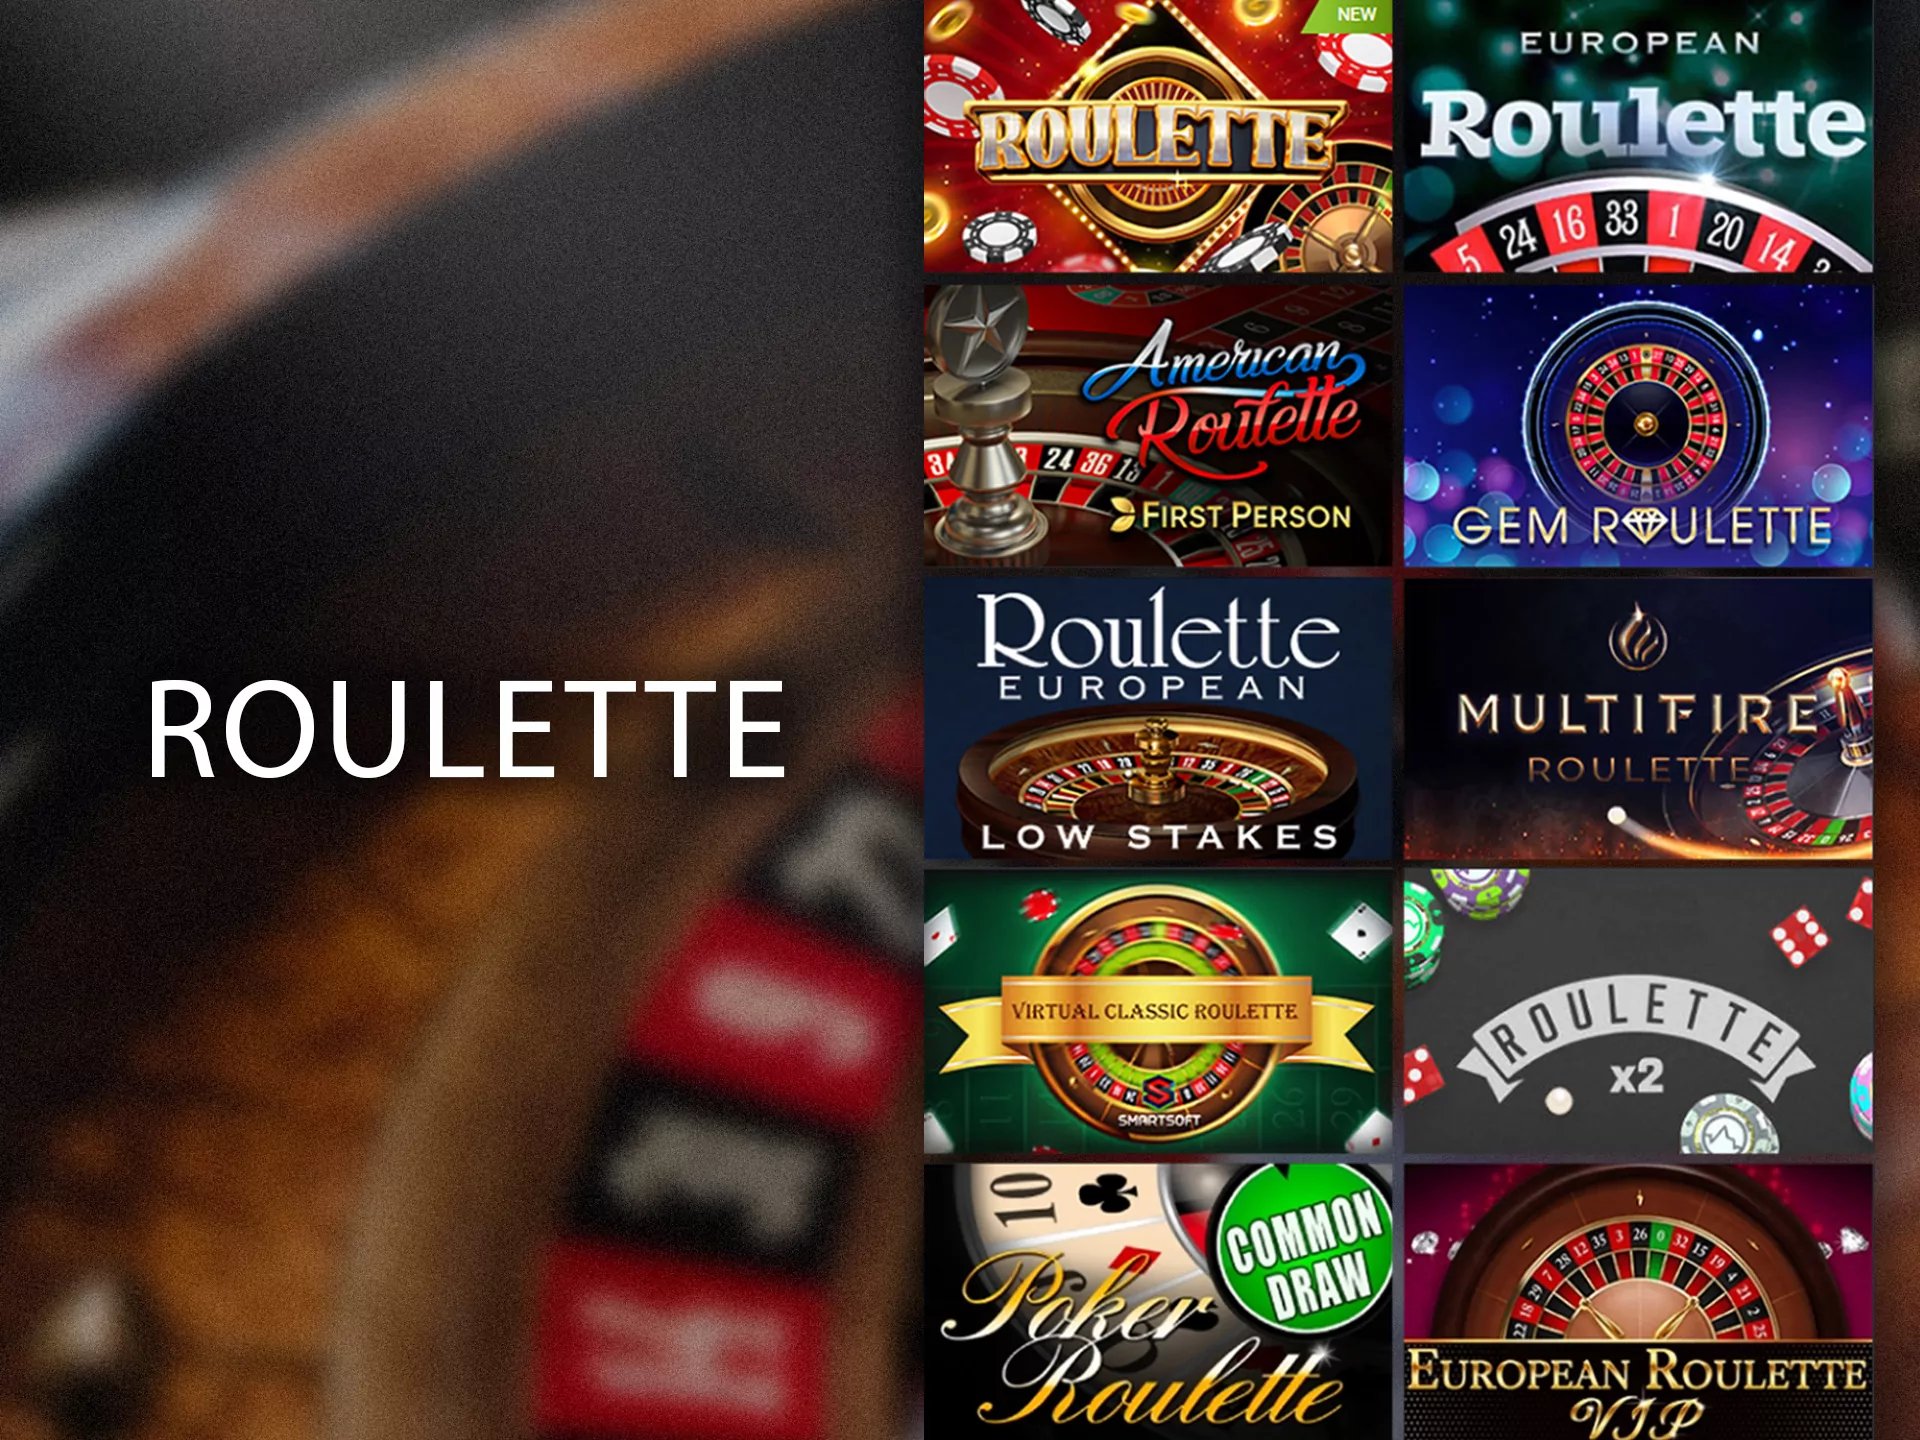 Online Roulette is available at 1xBet in India.